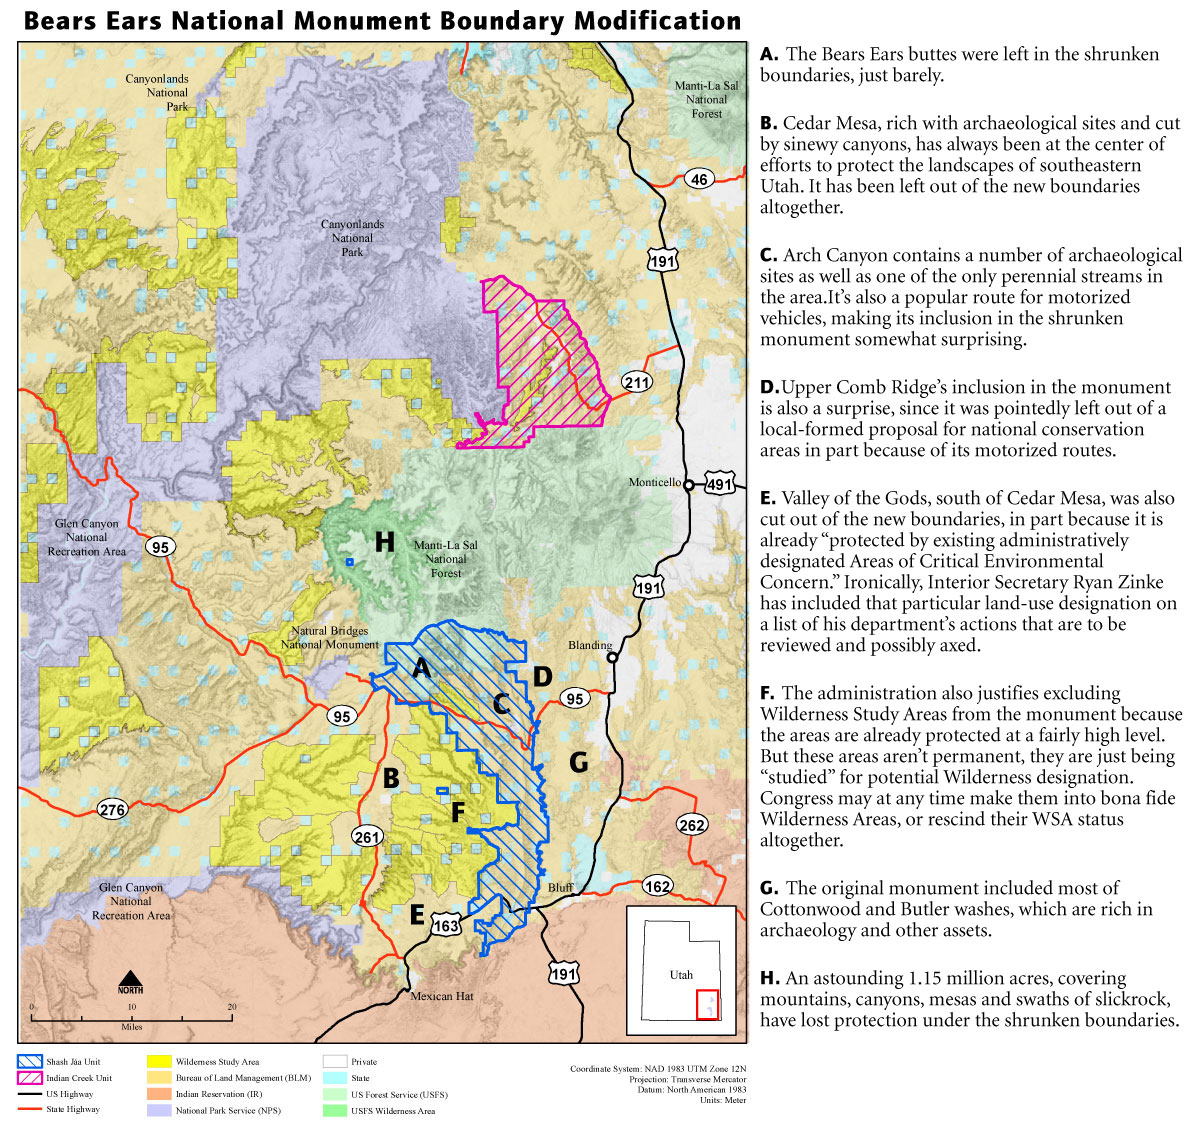 Map of Bears Ears boundary as modified by Trump